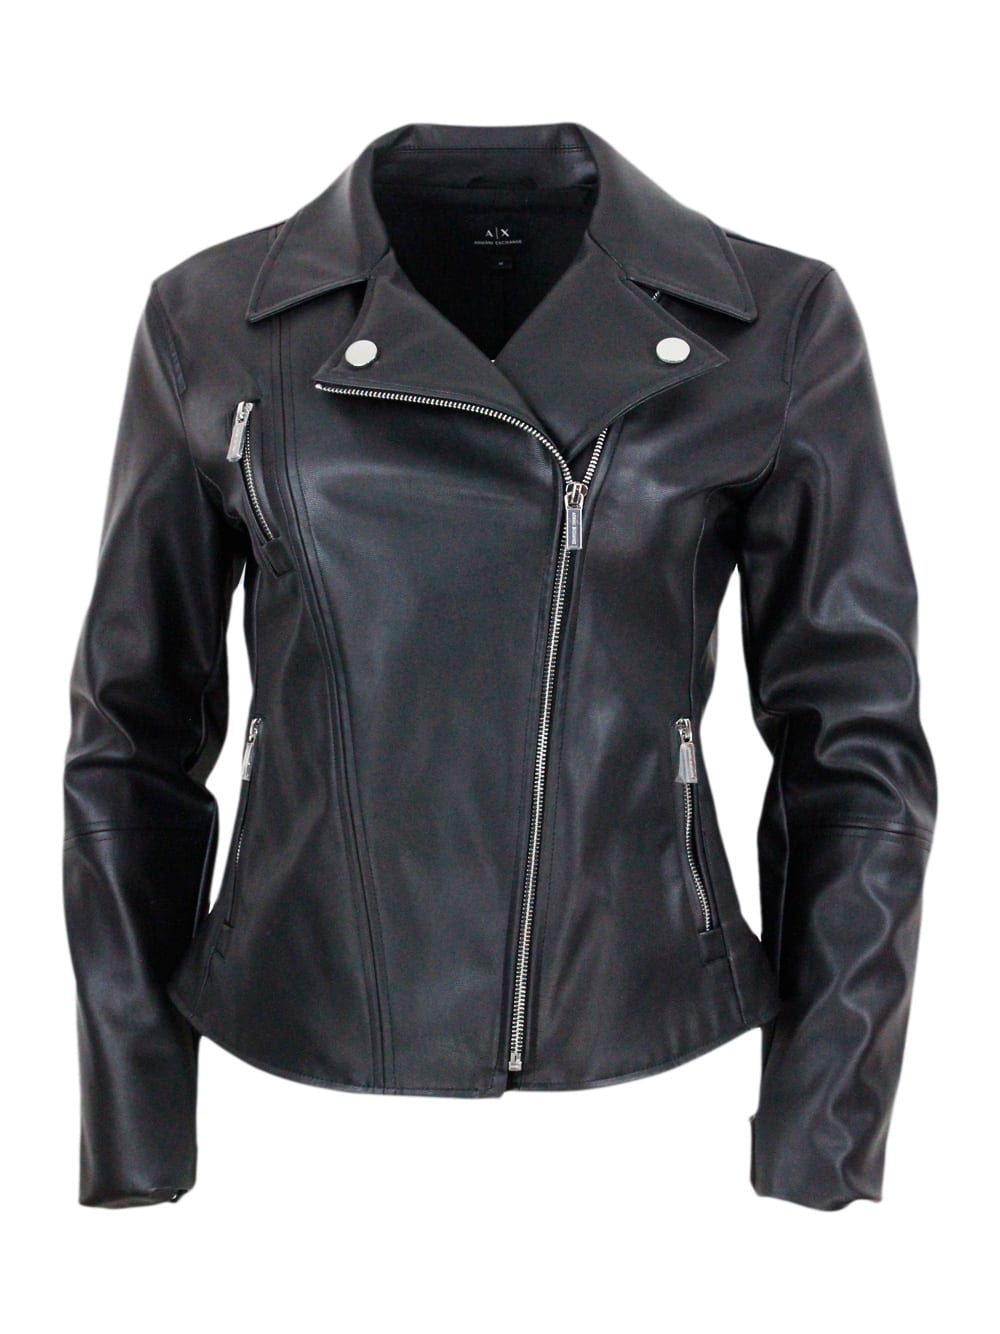 Studded Jacket Made Of Eco-leather With Zip Closure And Zips On The Cuffs And Pockets